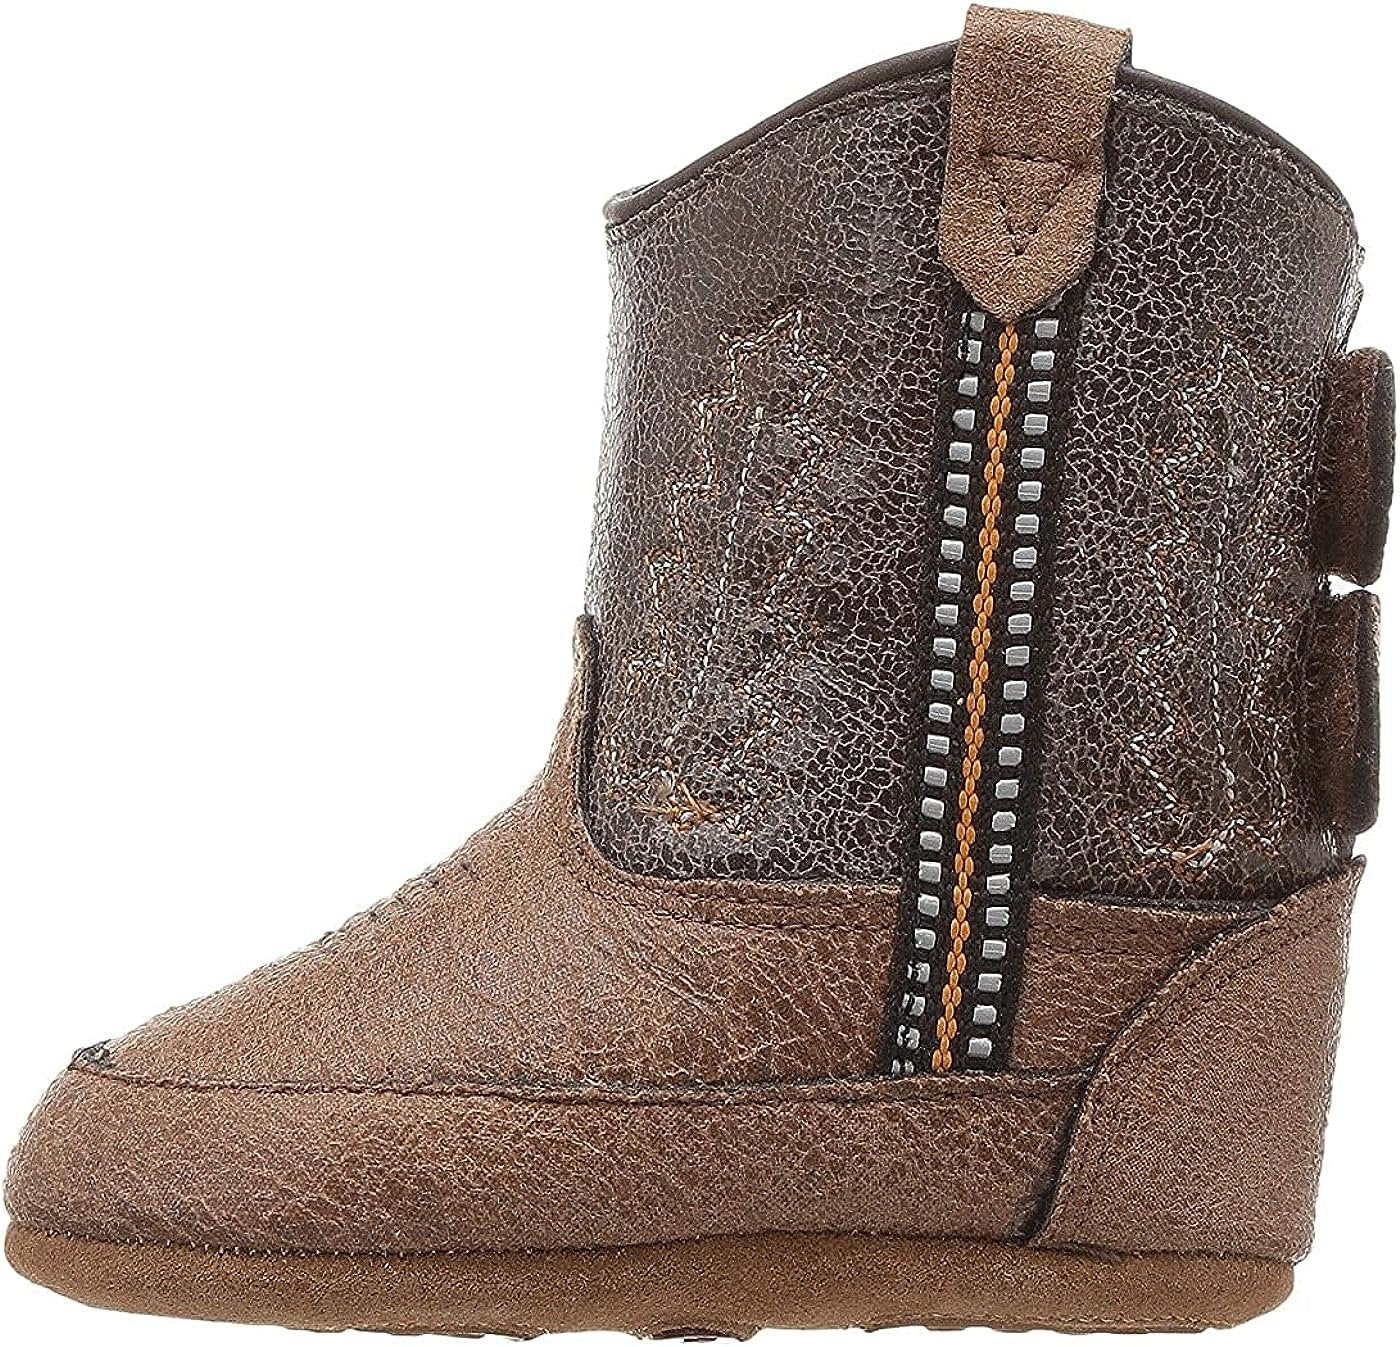 OLD WEST Kids Unisex Poppets (Infant/Toddler) Leather Boots with Velcro Closure